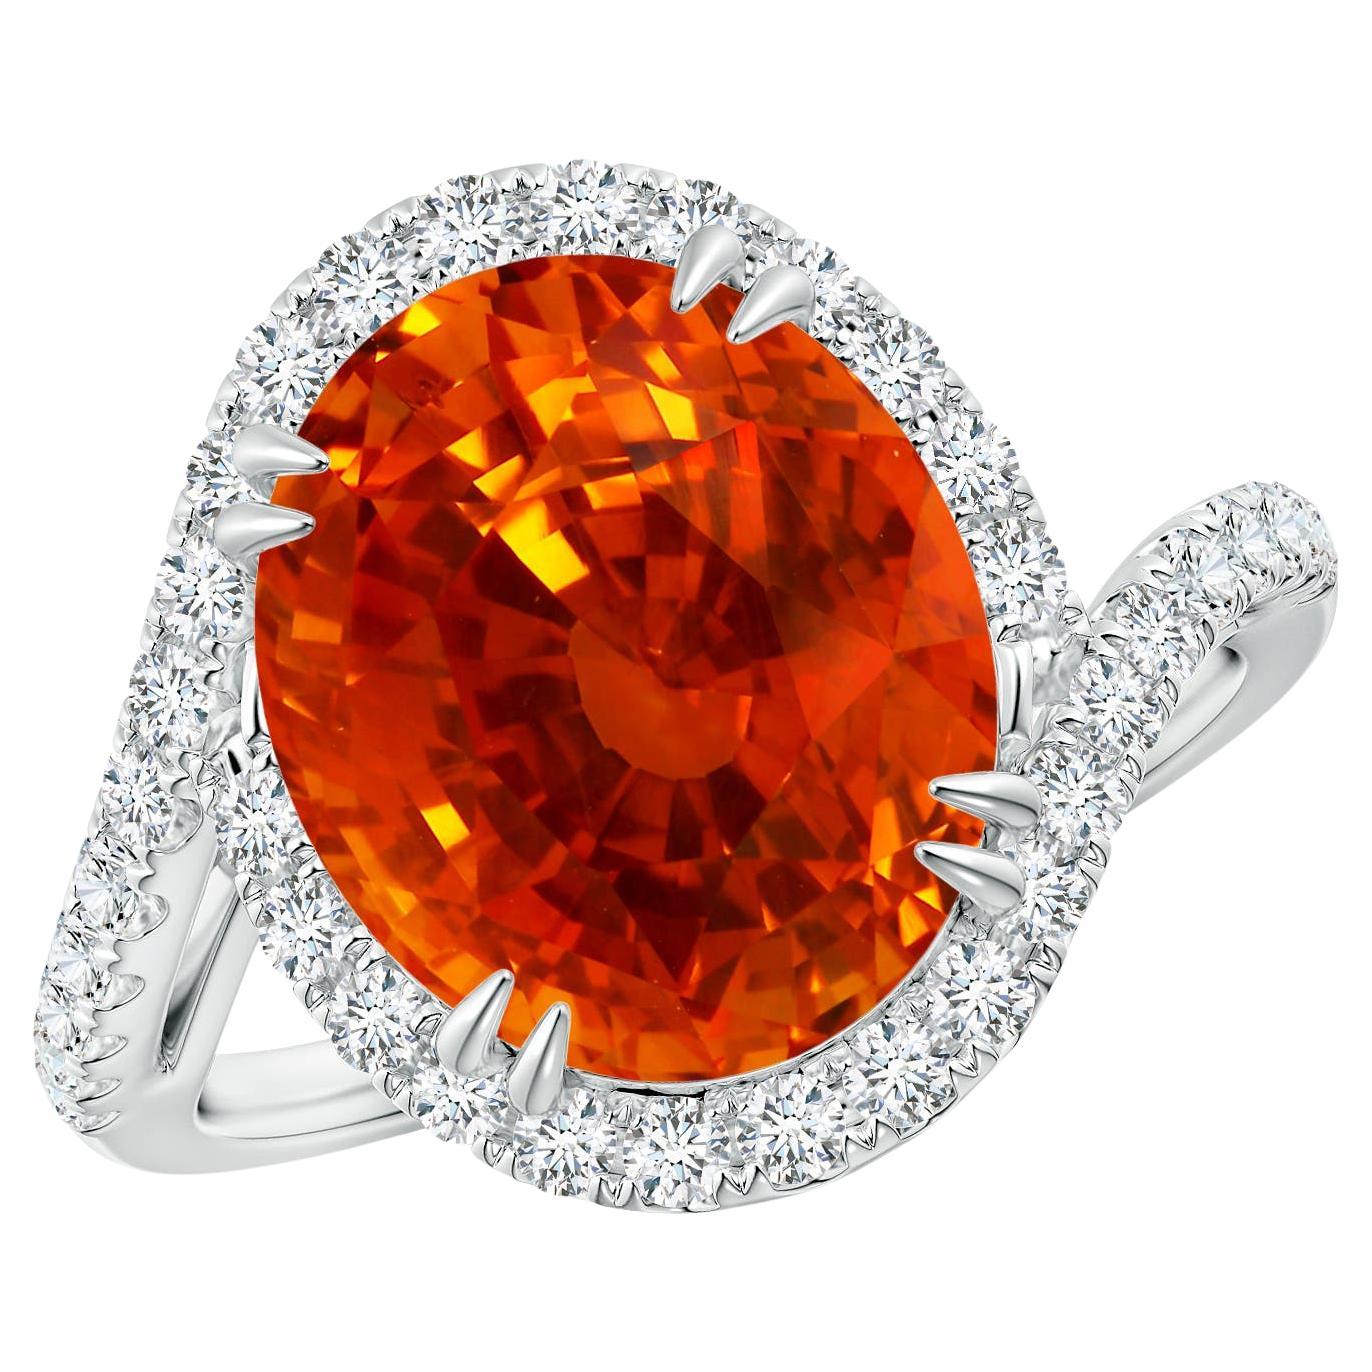 For Sale:  Angara GIA Certified Natural Orange Sapphire Ring in Platinum with Diamonds